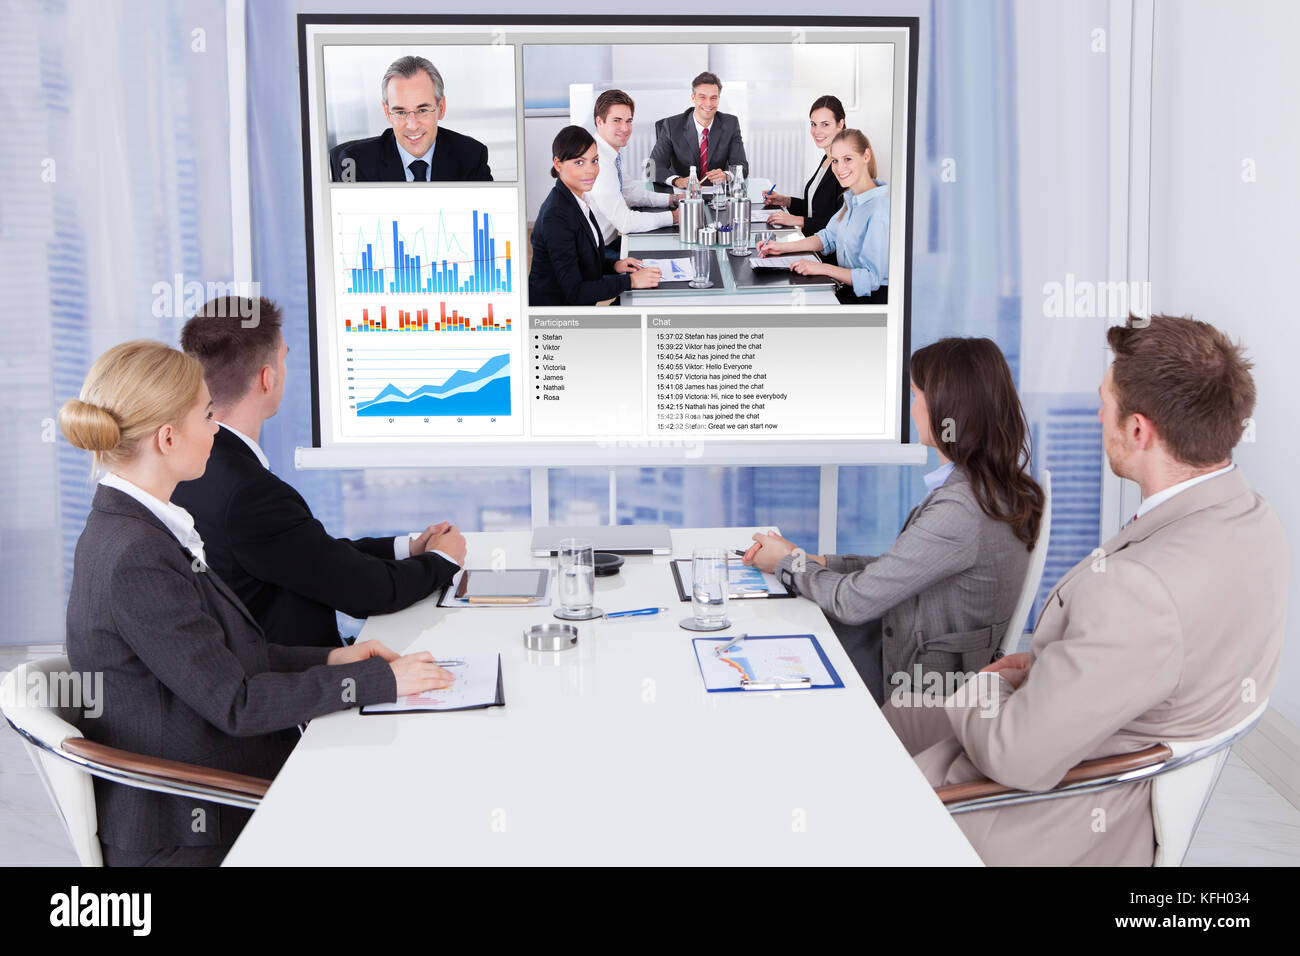 Group of business people attending video conference at table in office Stock Photo